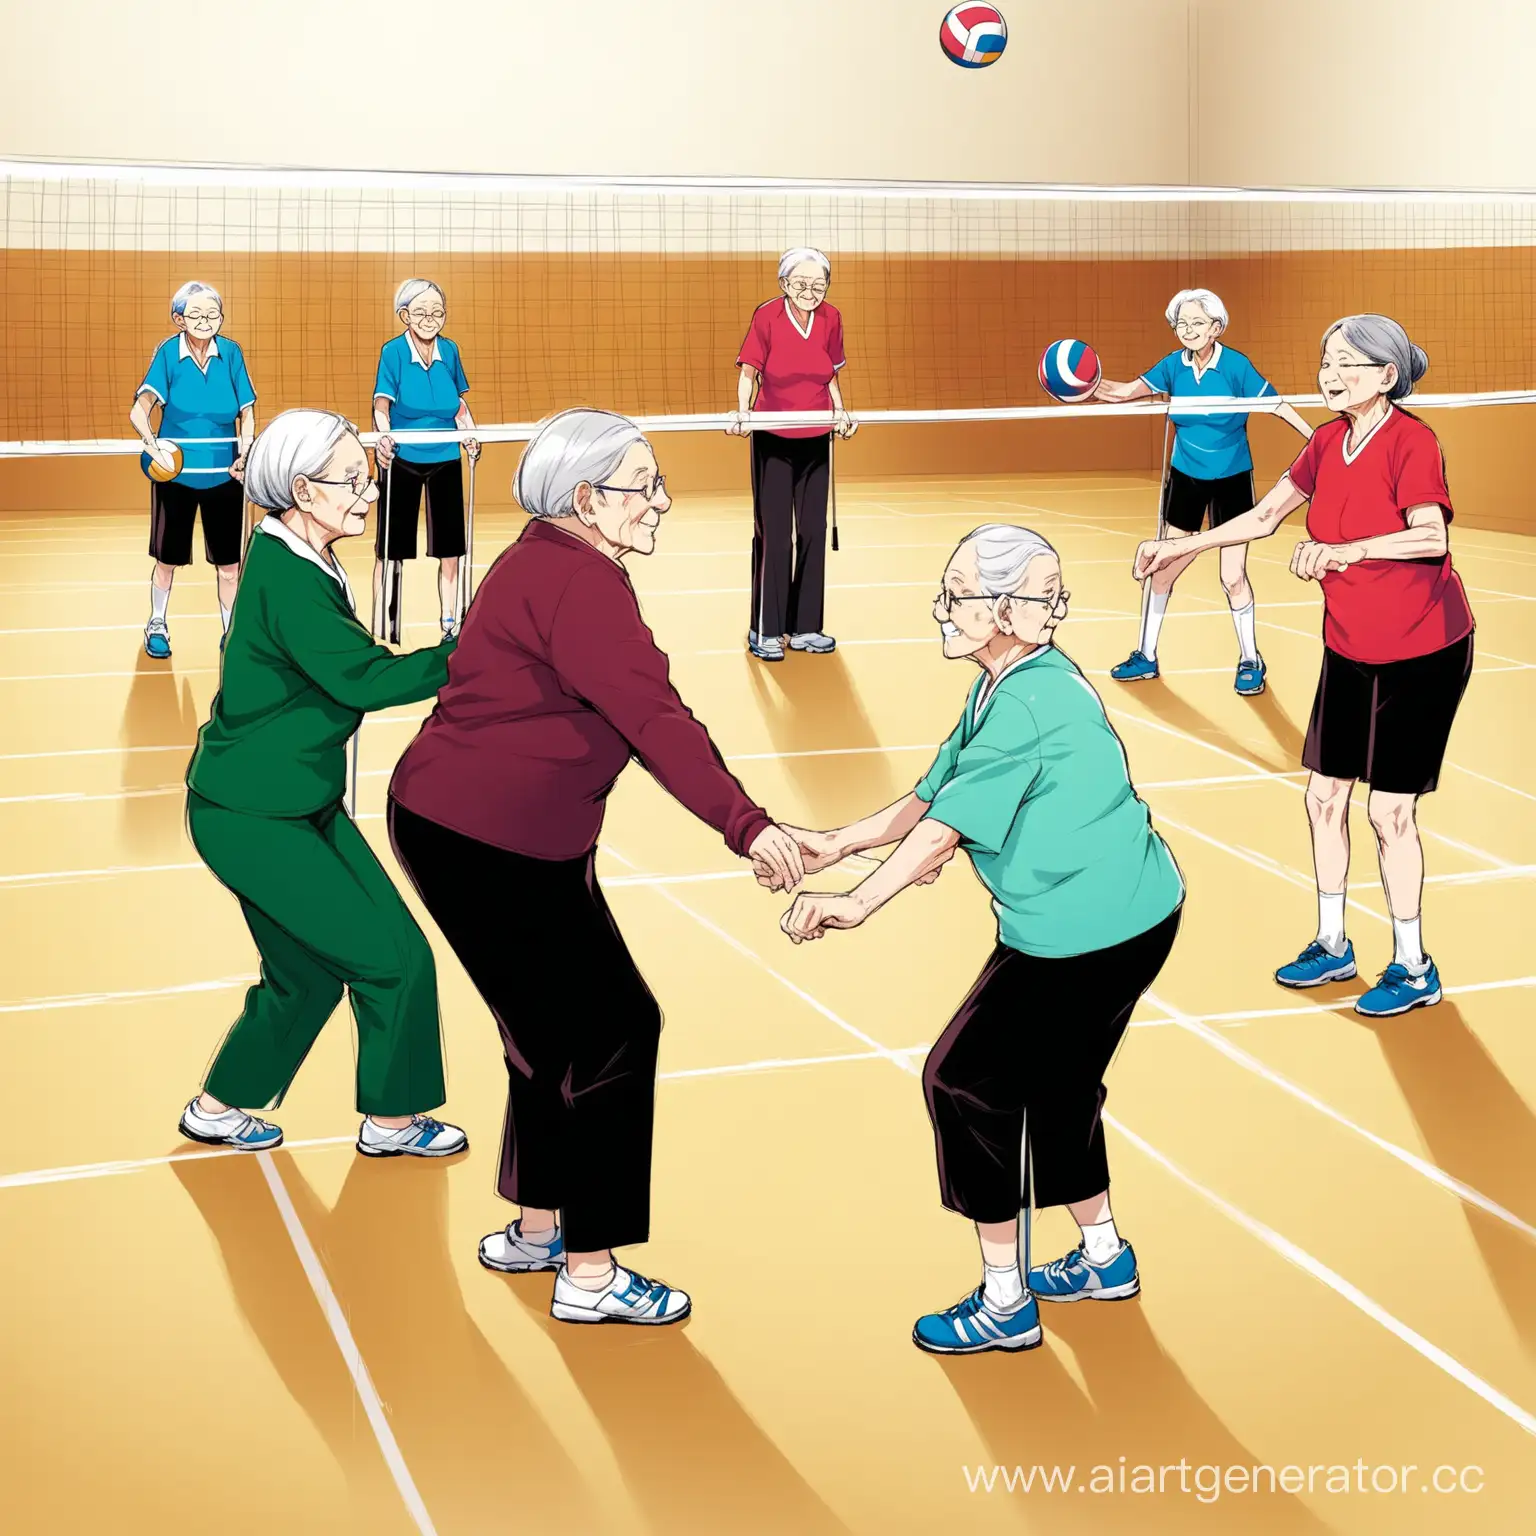 6 old people are playing hall volleyball, some of them with health crutches